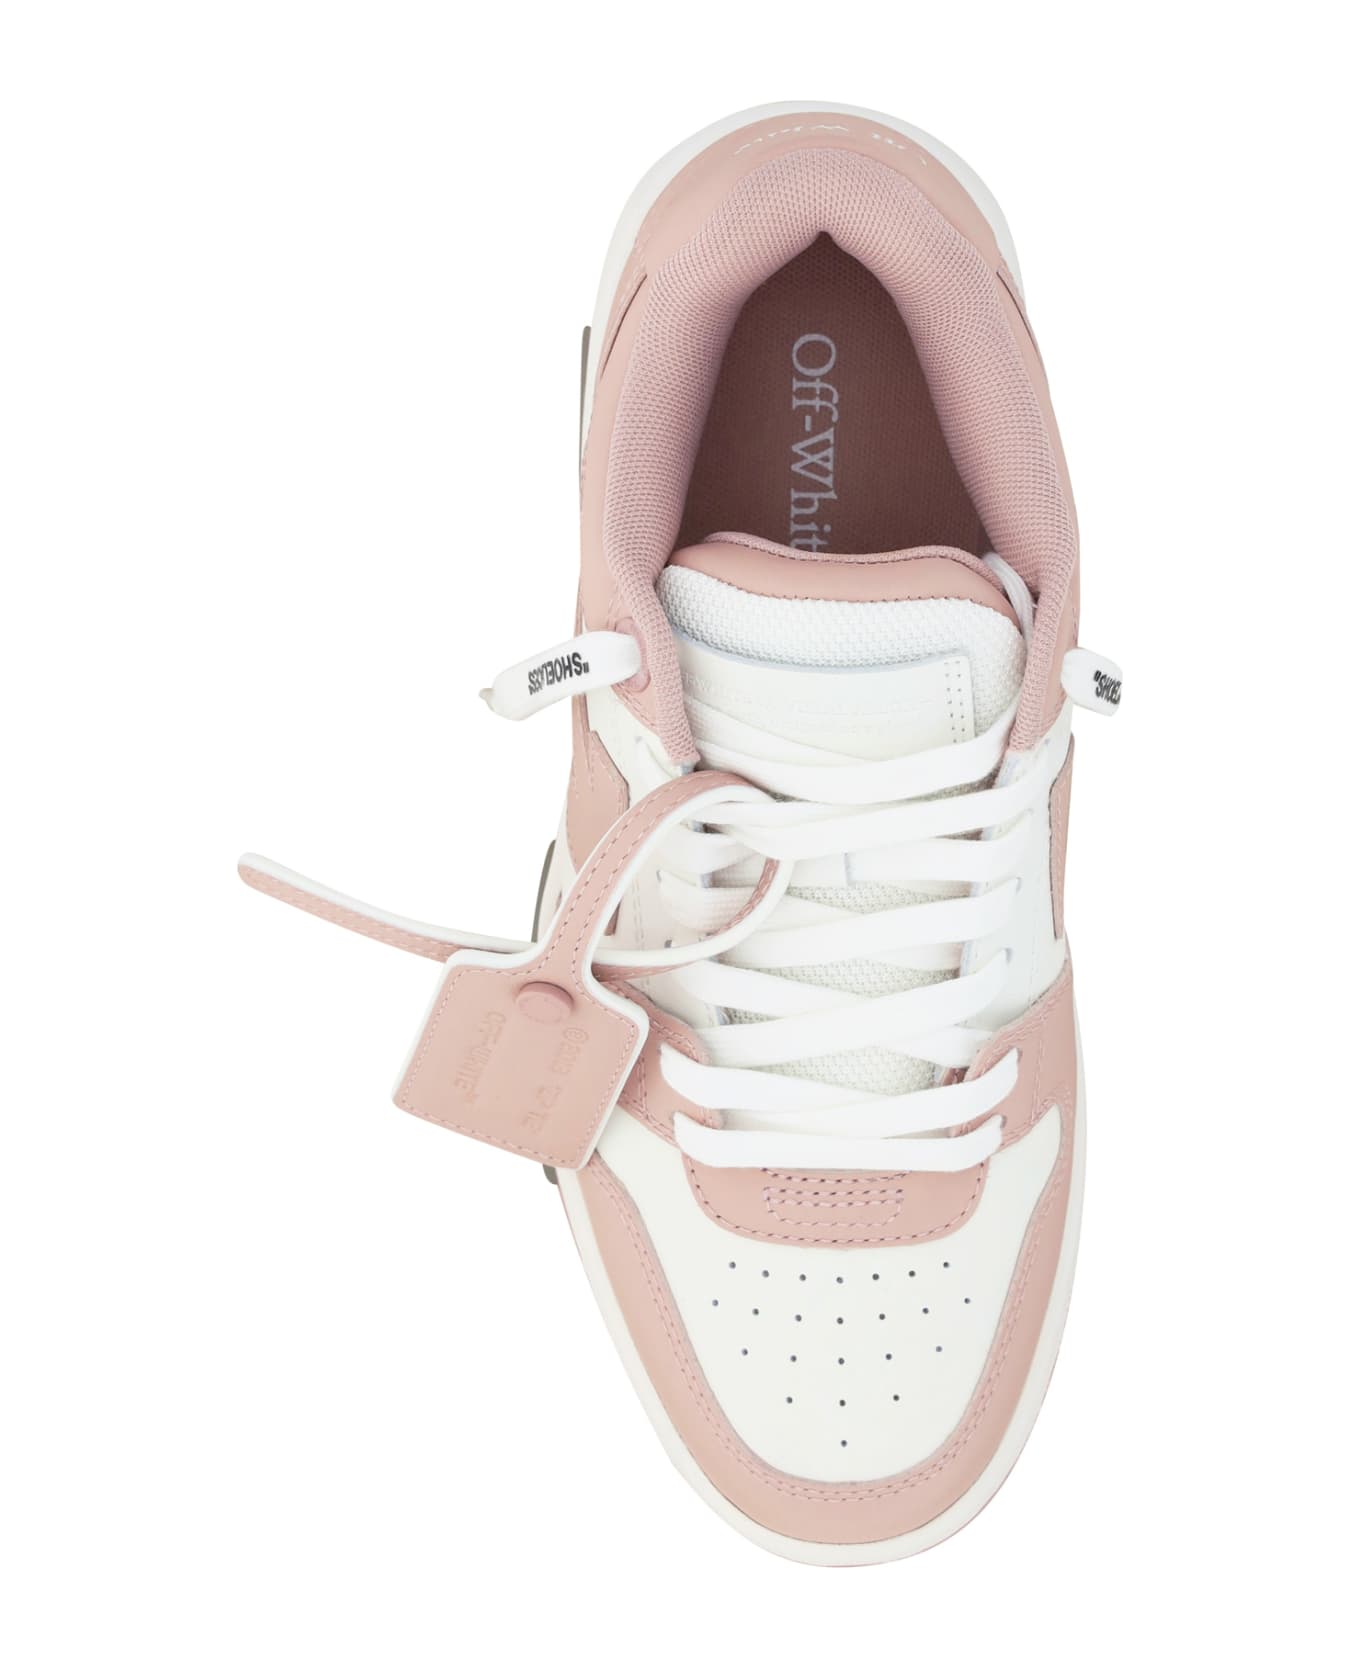 Off-White Out Of Office Sneakers - White